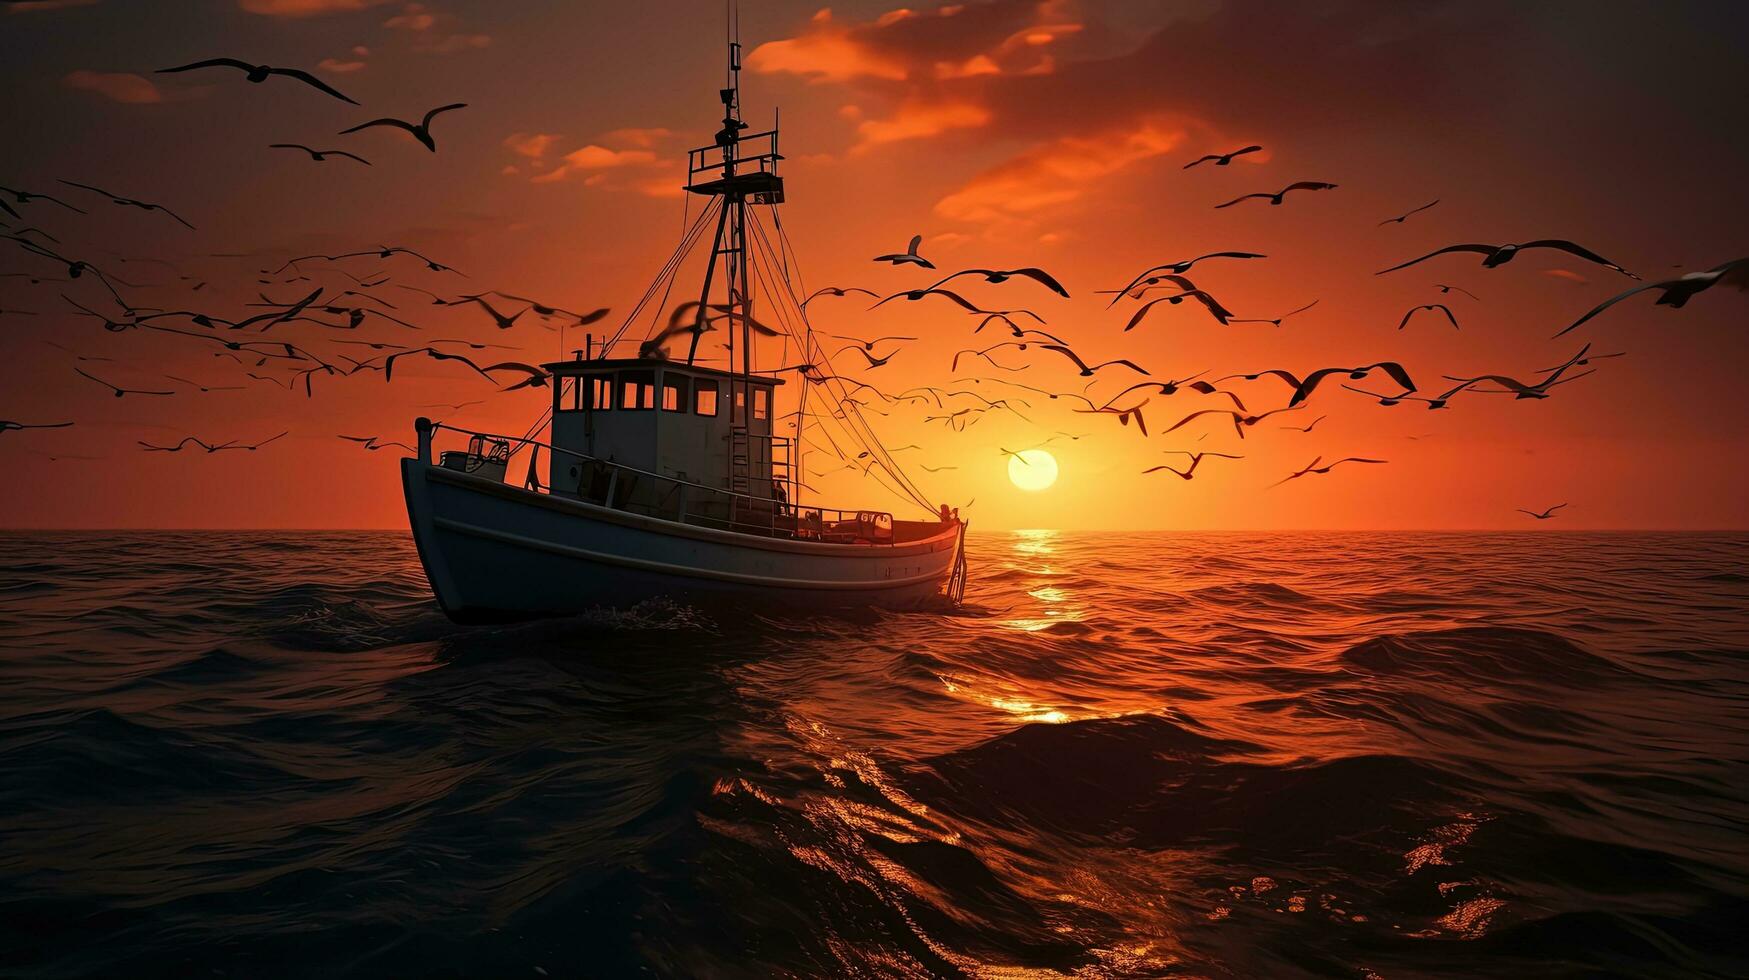 Birds flying over a shrimp fishing boat at sunset in the open sea. silhouette concept photo